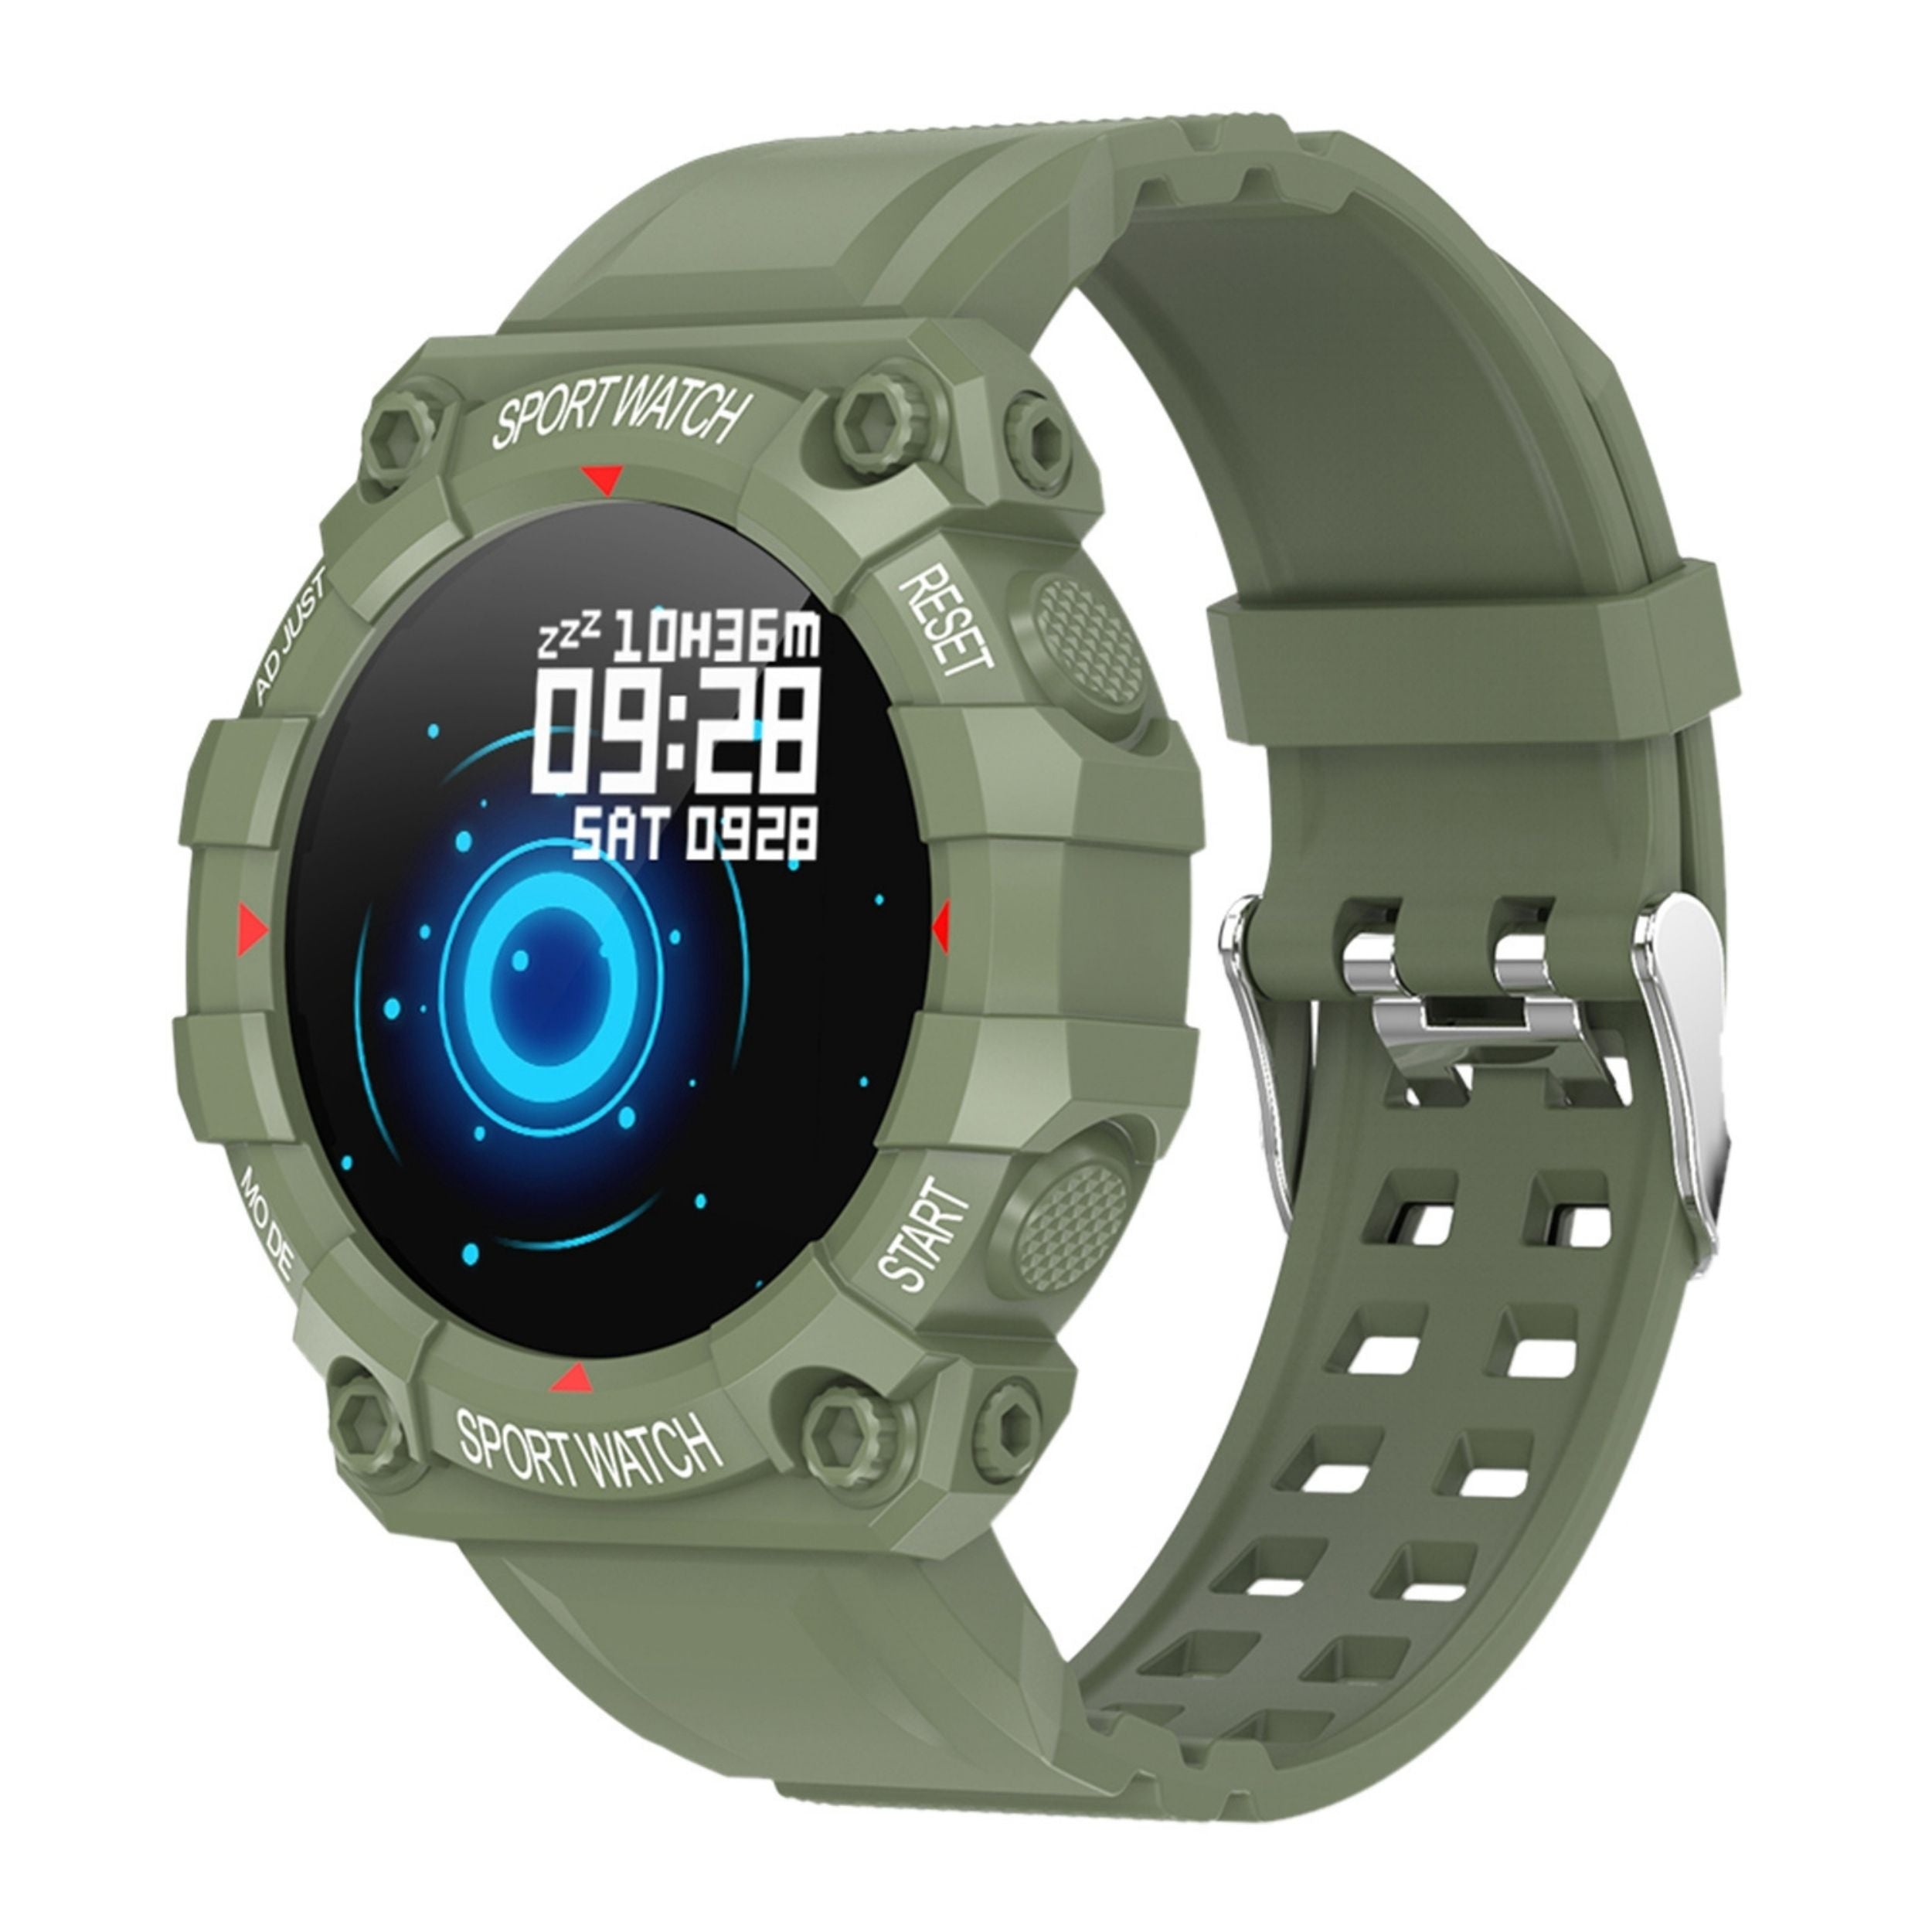 title:1.3" Wireless Fitness Tracker, IP67 Waterproof Smart Watch with Heart Rate, Blood Pressure, Sleep Monitor for Android & iOS;color:Green